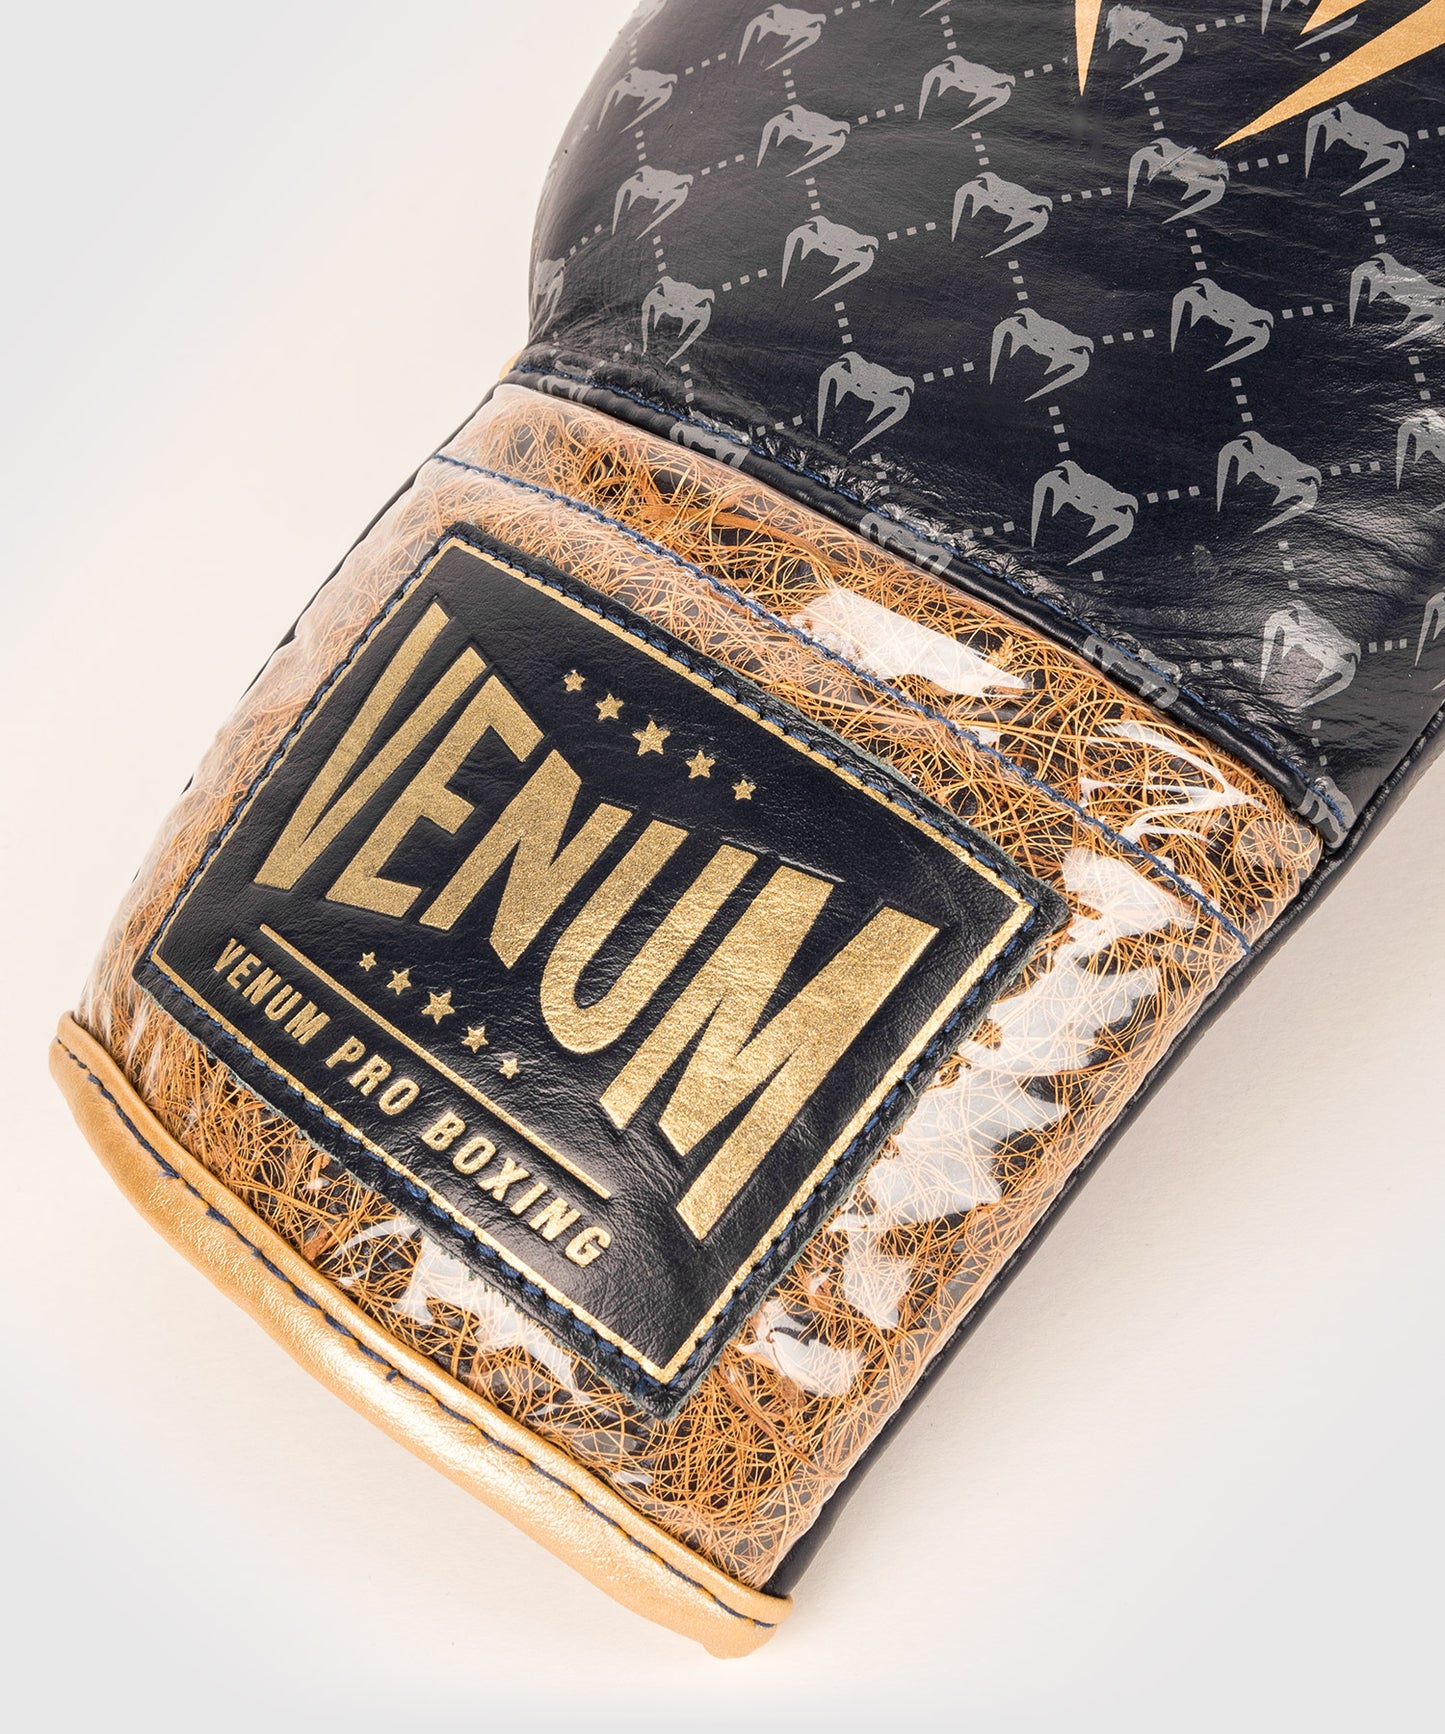 Venum Coco Monogram Pro Lace Up Boxing Gloves - State Blue